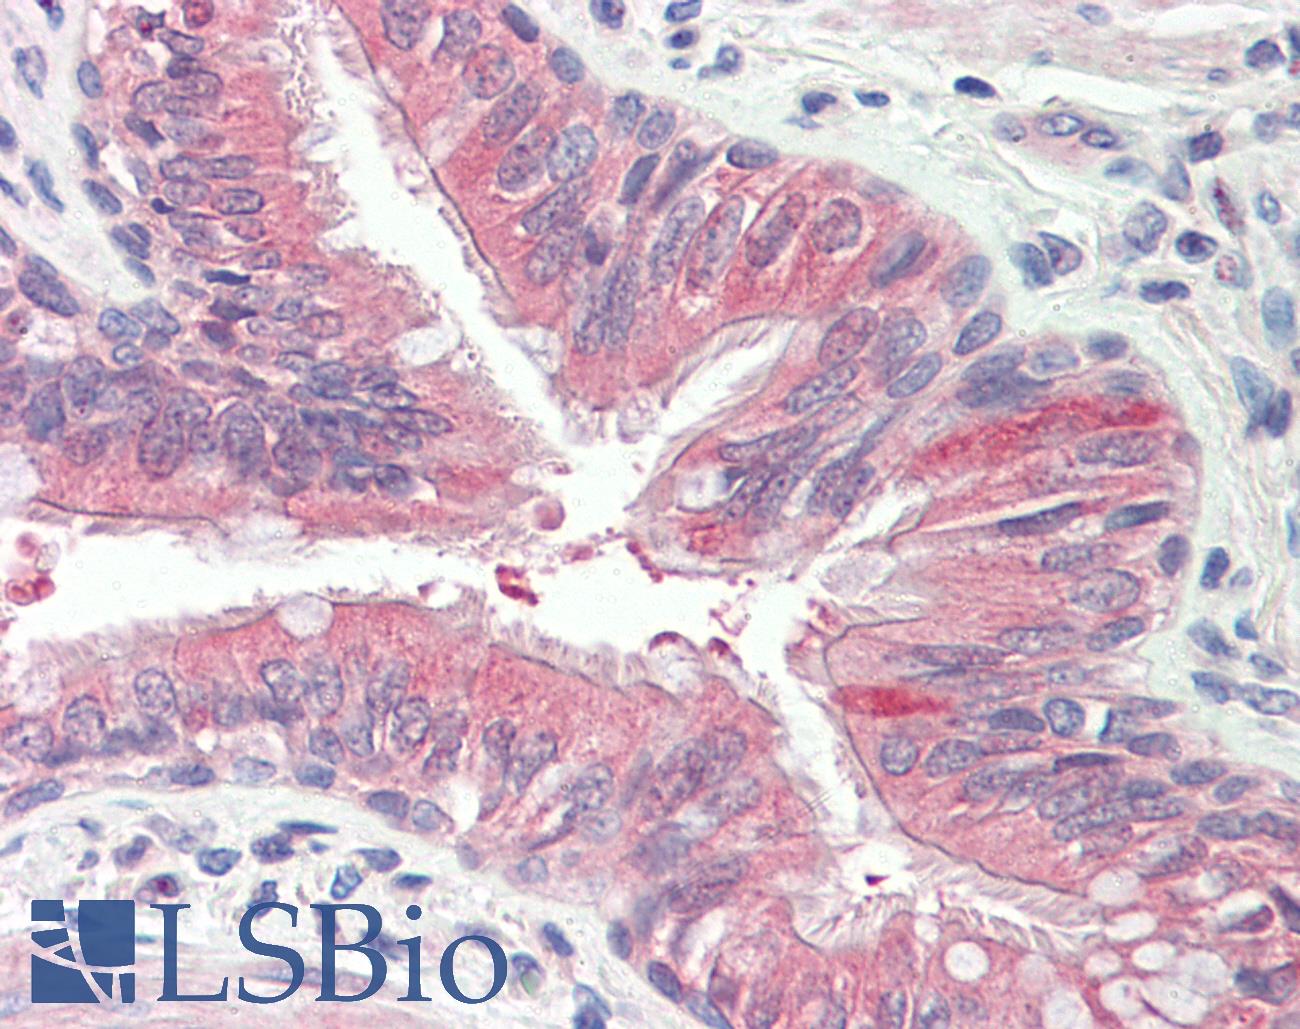 EPS8L2 Antibody - Anti-EPS8L2 antibody IHC staining of human lung, respiratory epithelium. Immunohistochemistry of formalin-fixed, paraffin-embedded tissue after heat-induced antigen retrieval.